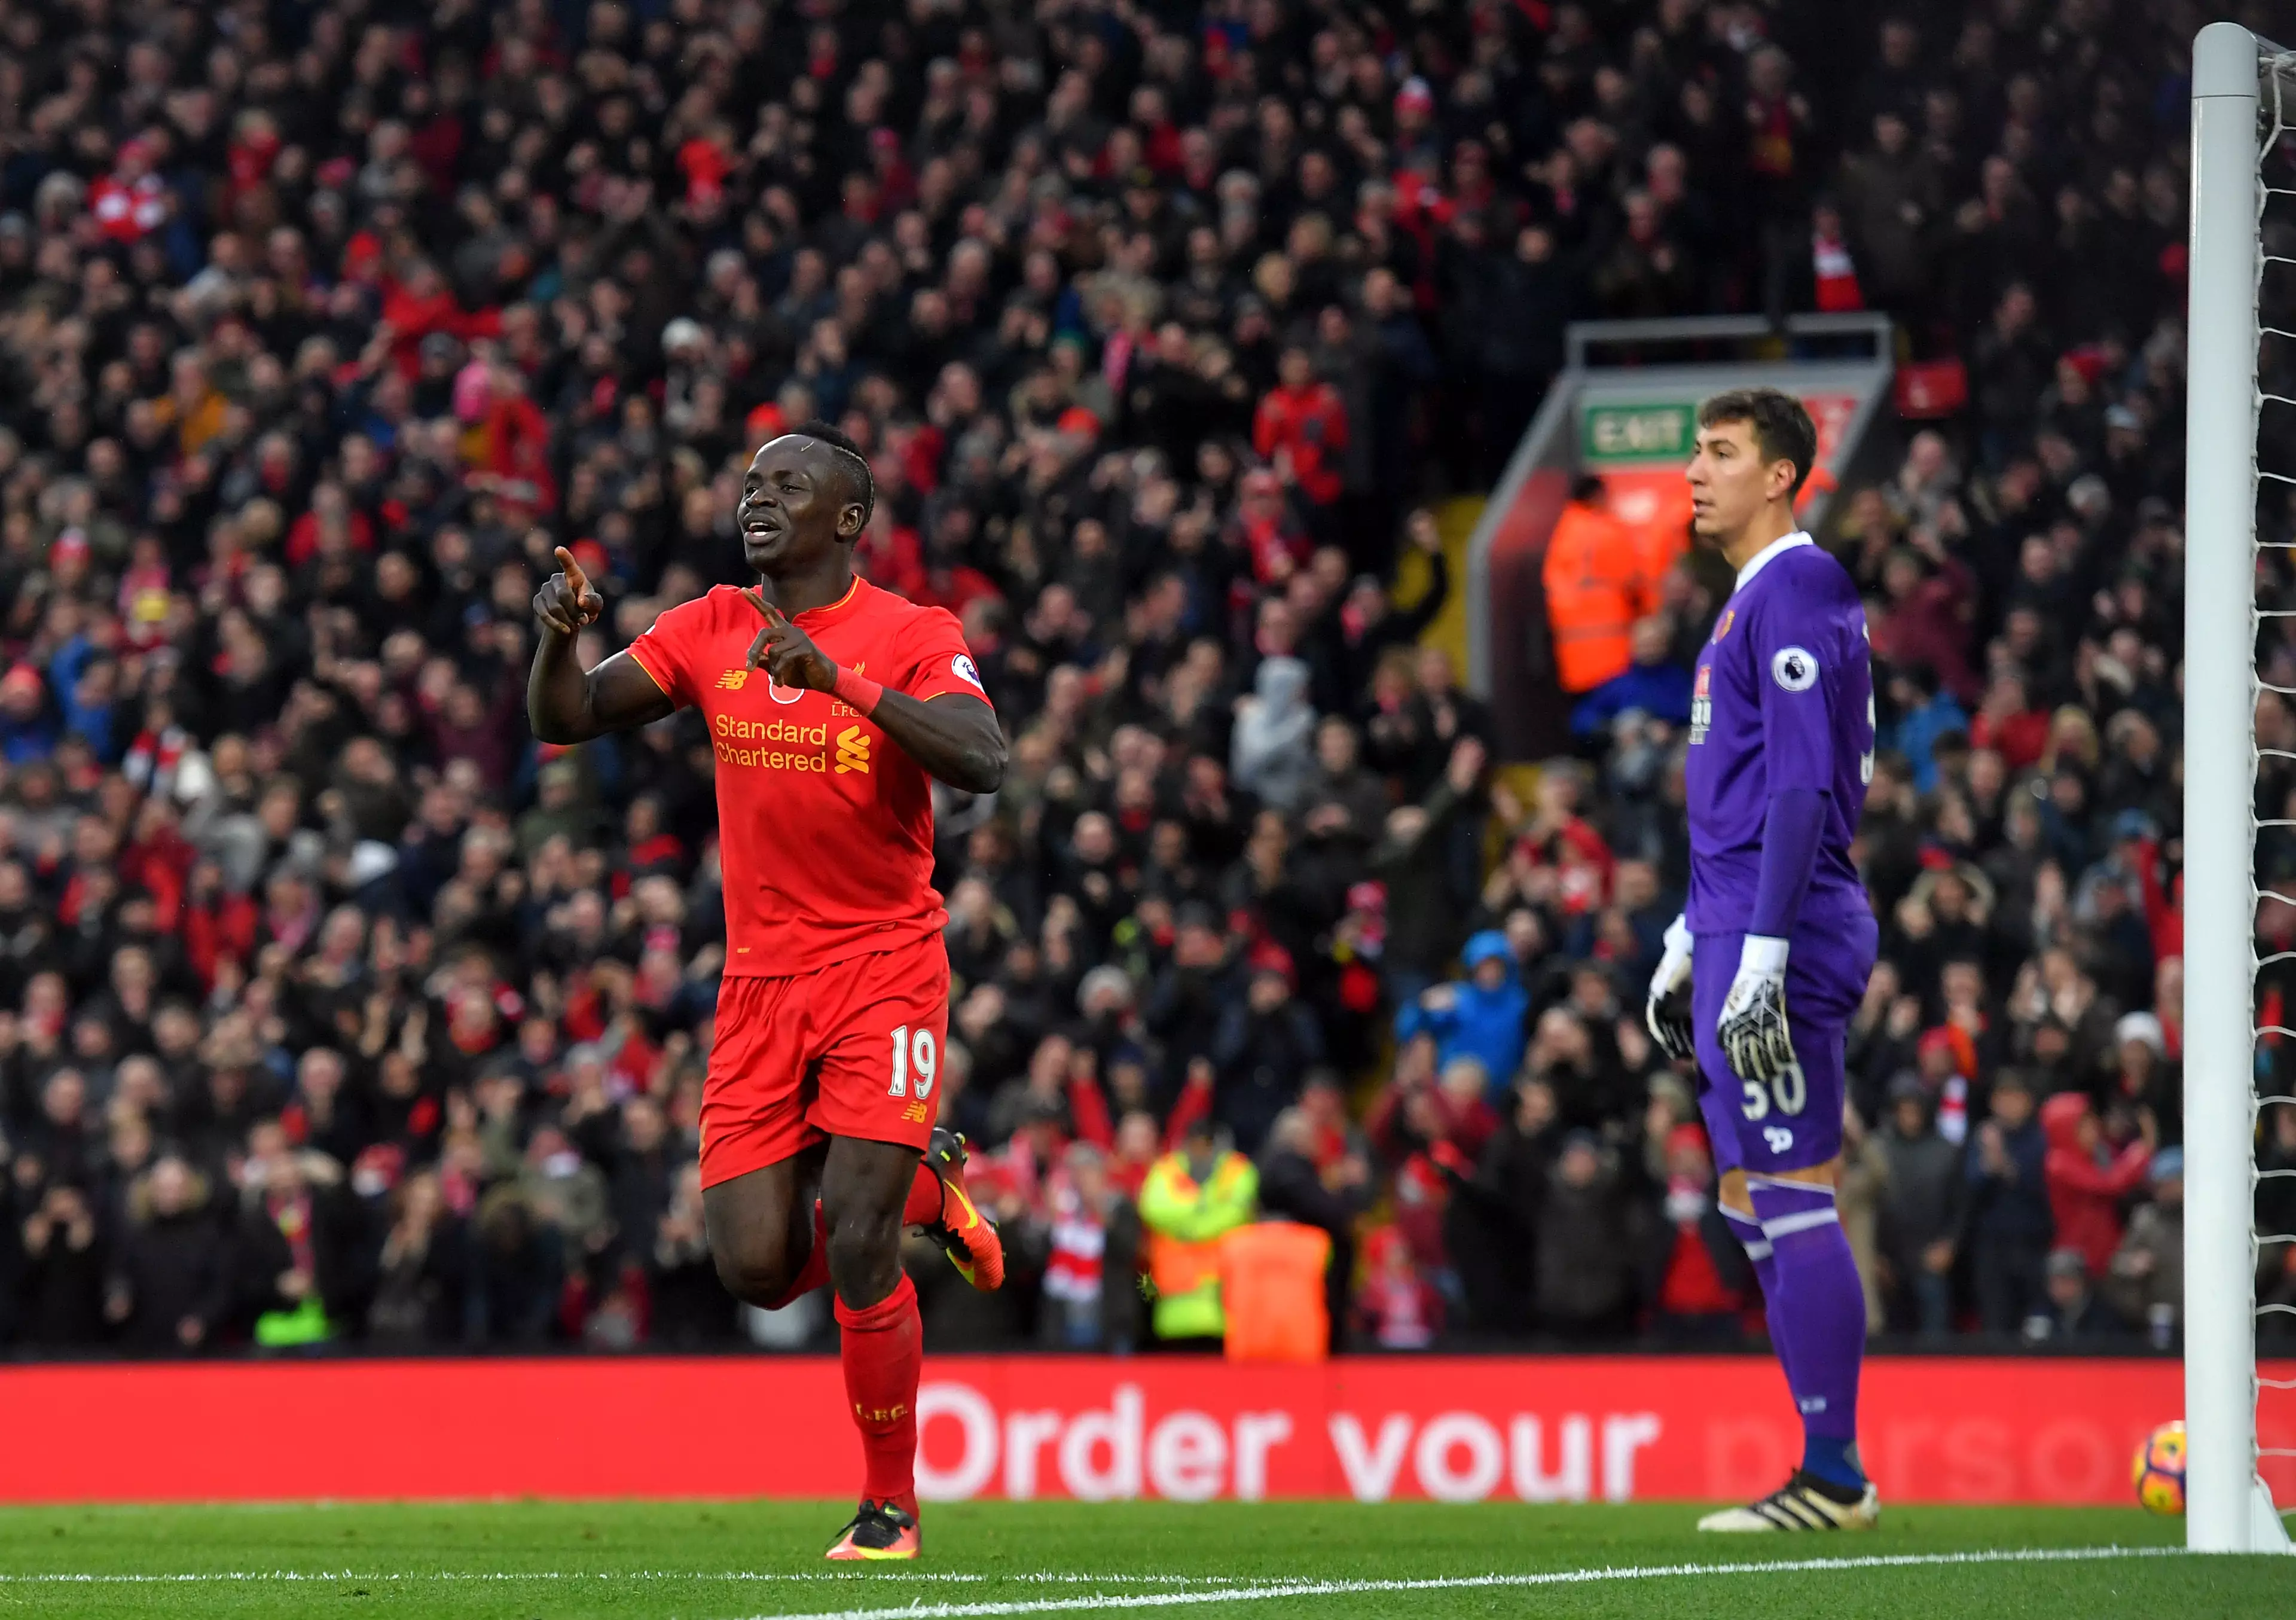 Mane is one of Jurgen Klopp's most important players. Image: PA Images